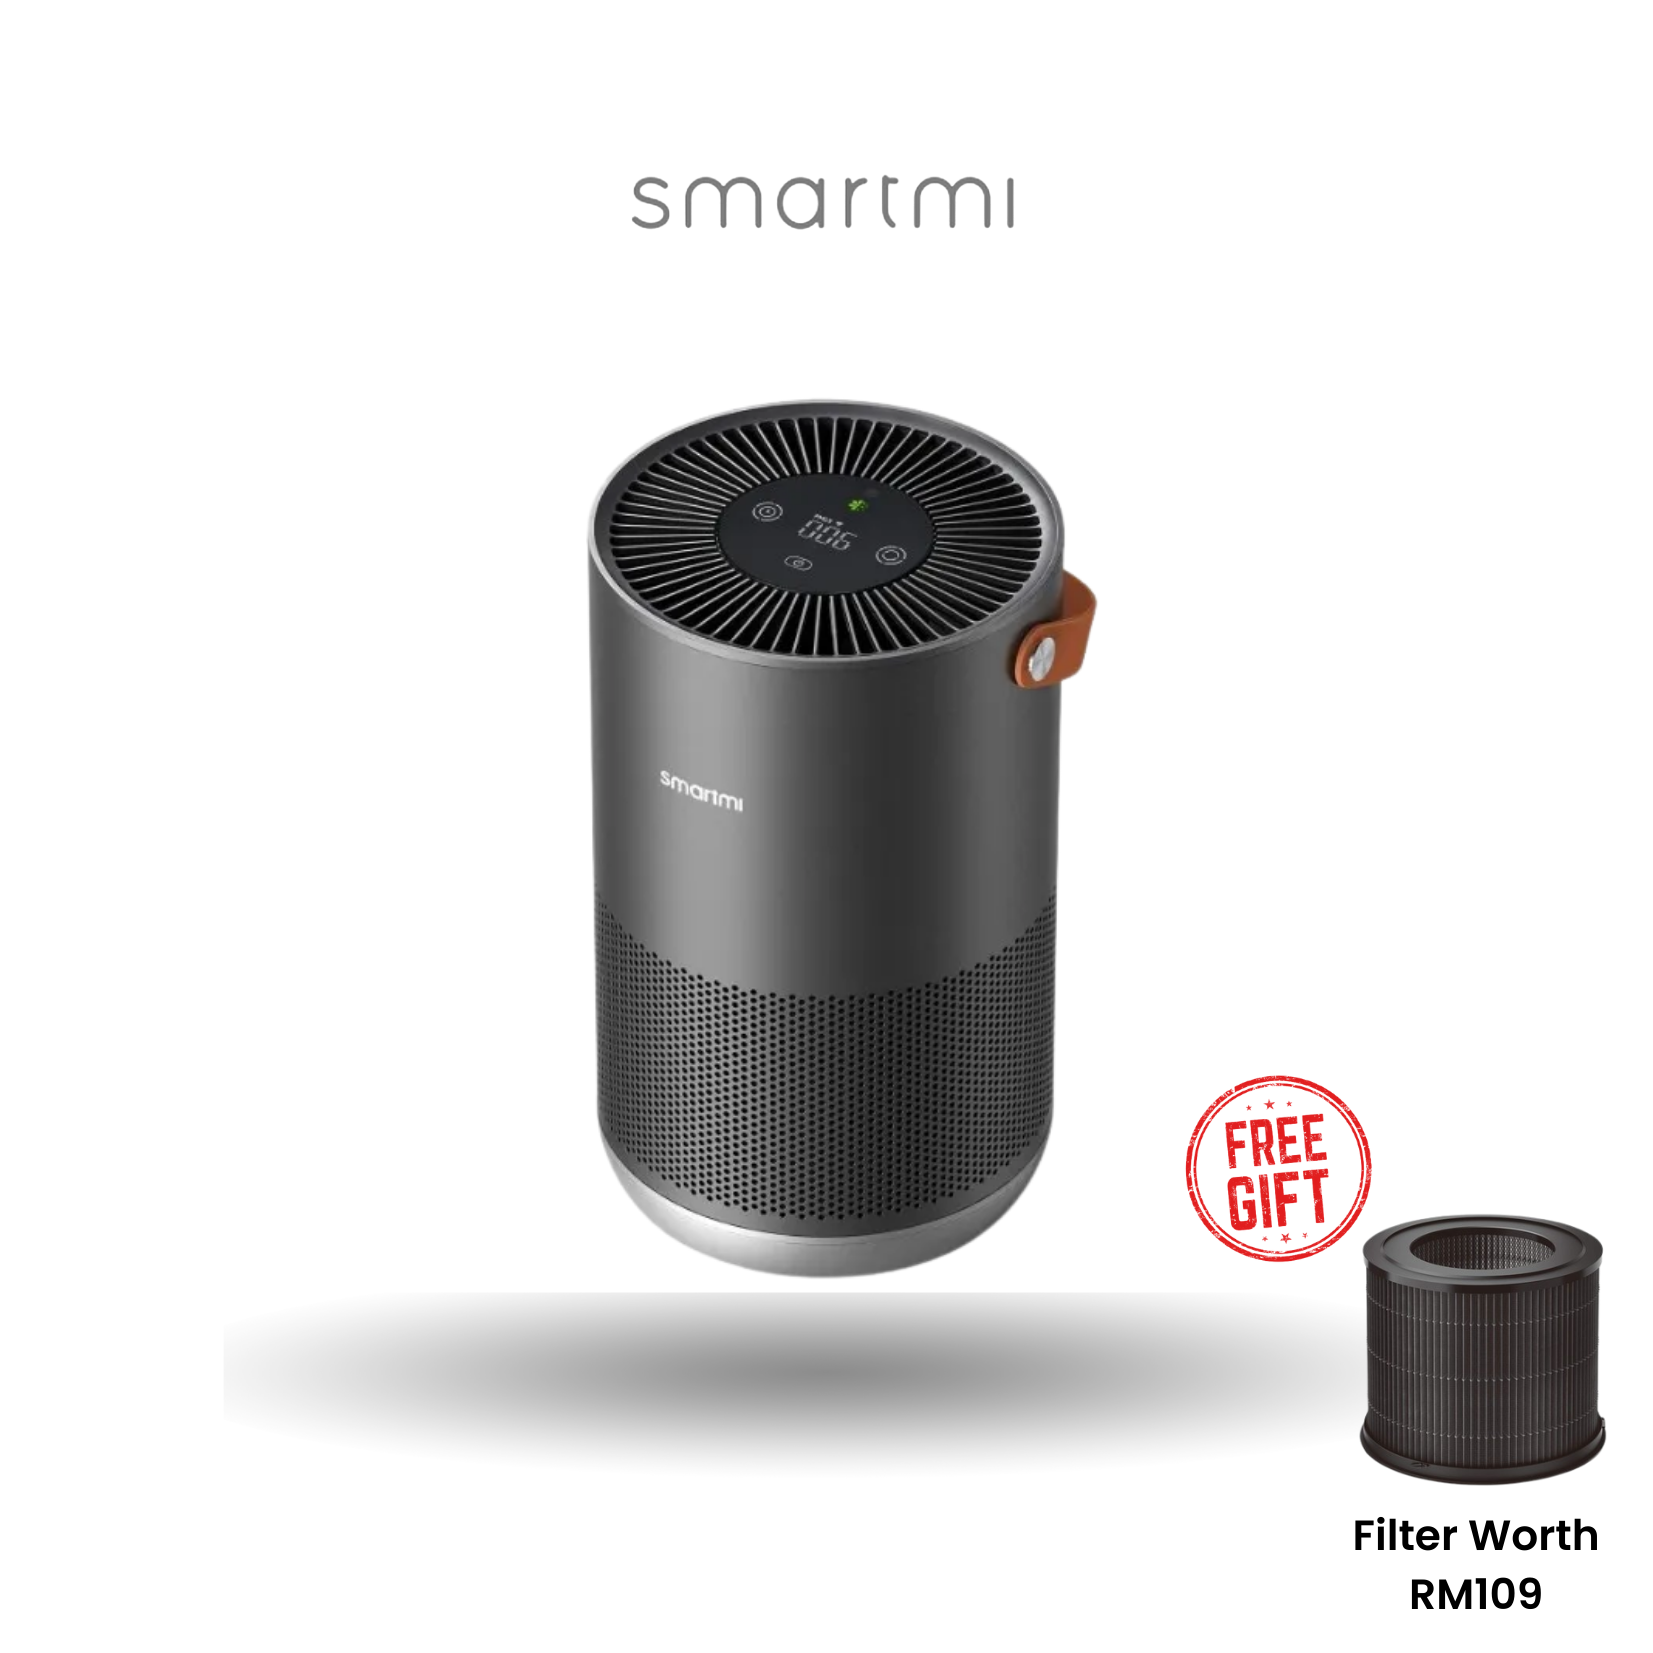 Smartmi Air Purifier P1with free gift